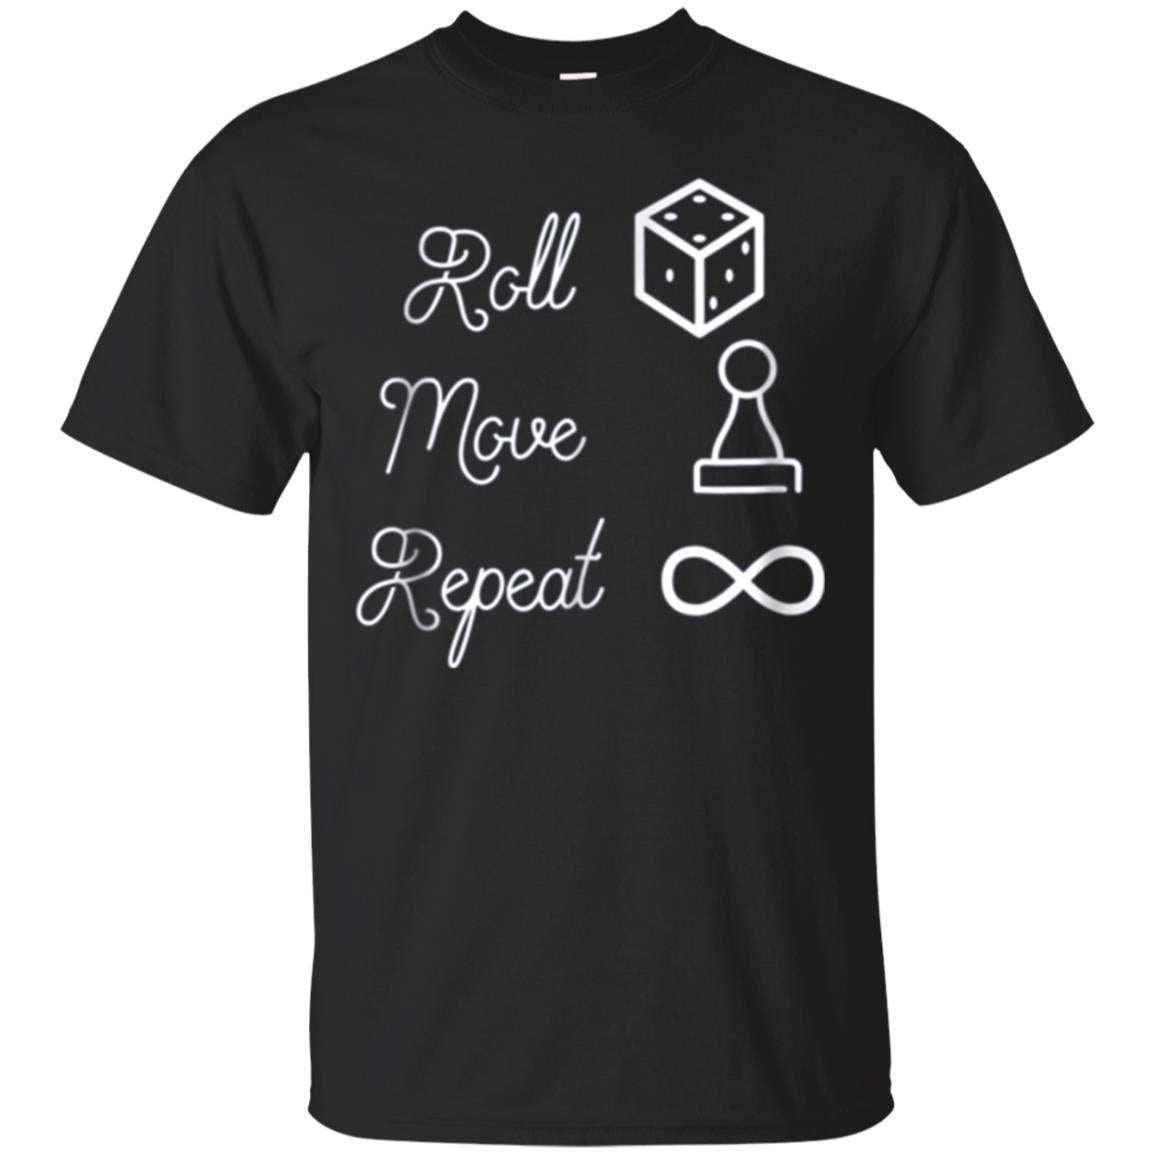 Roll Move Repeat Funny Board Game T-shirt